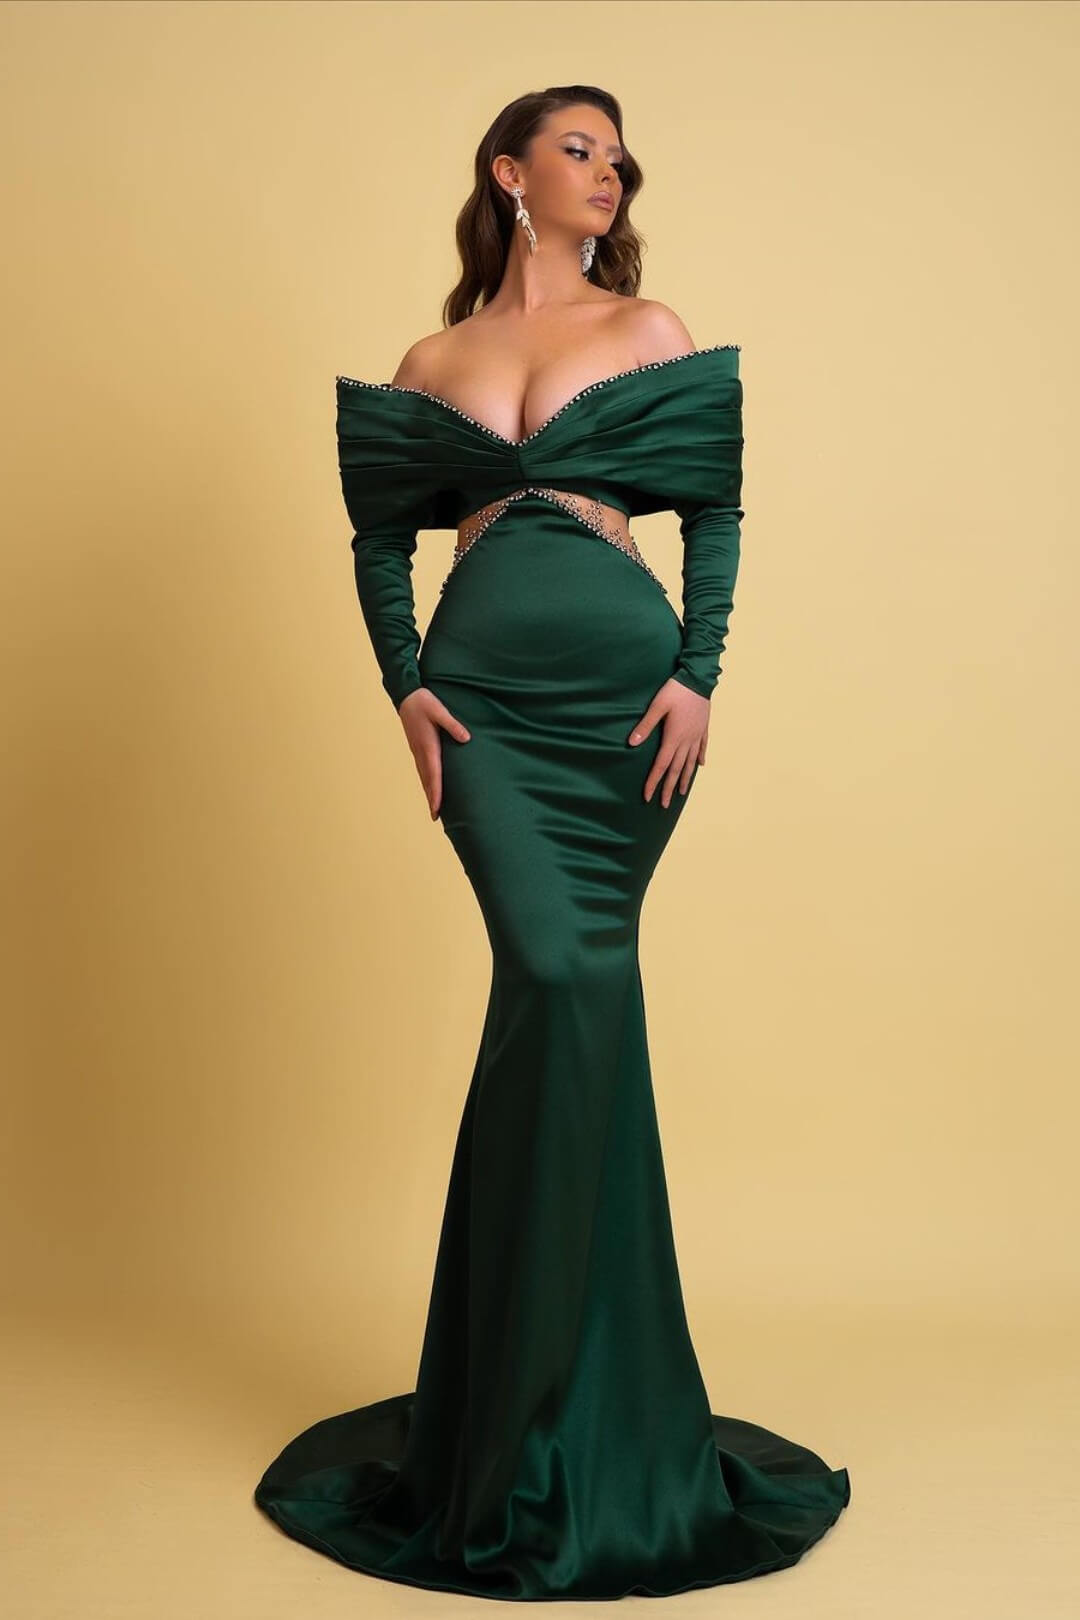 Bellasprom Dark Green Off-the-shoulder Long Sleeves Mermaid Prom Dress With Beads Bellasprom